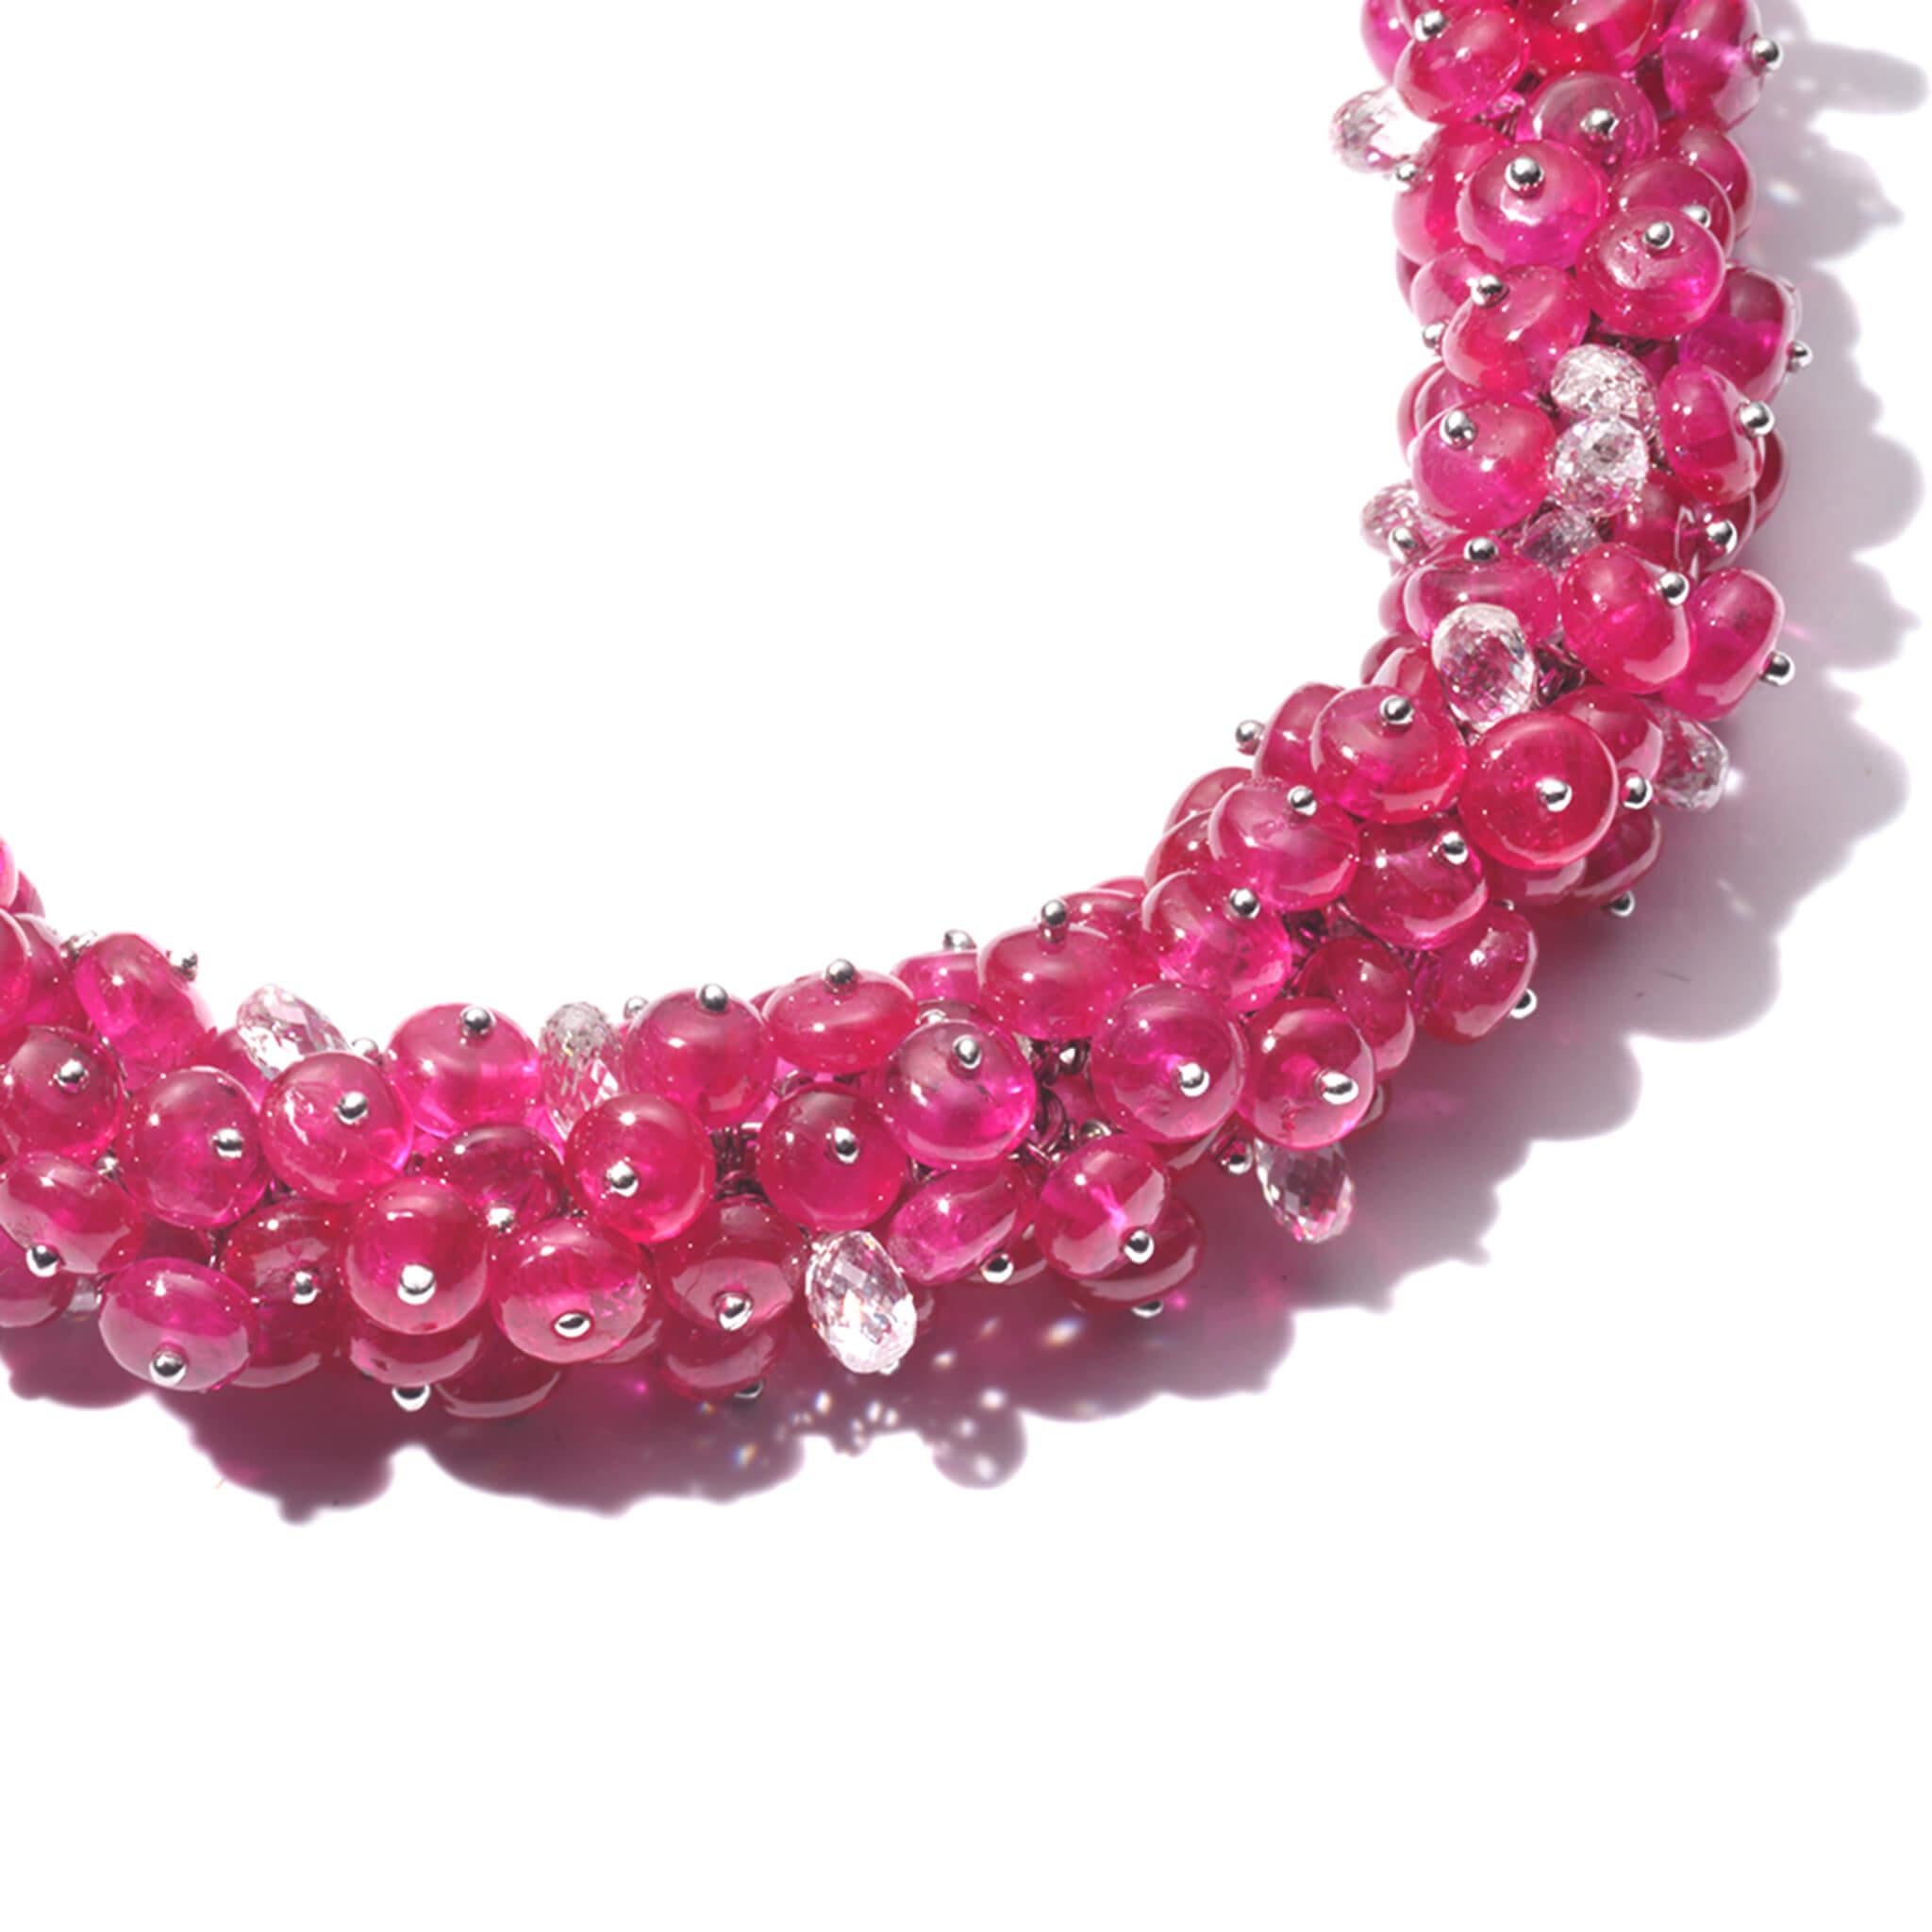 COOMI Trinity collection bracelet with 93.74cts ruby beads and 9.77cts diamonds. 